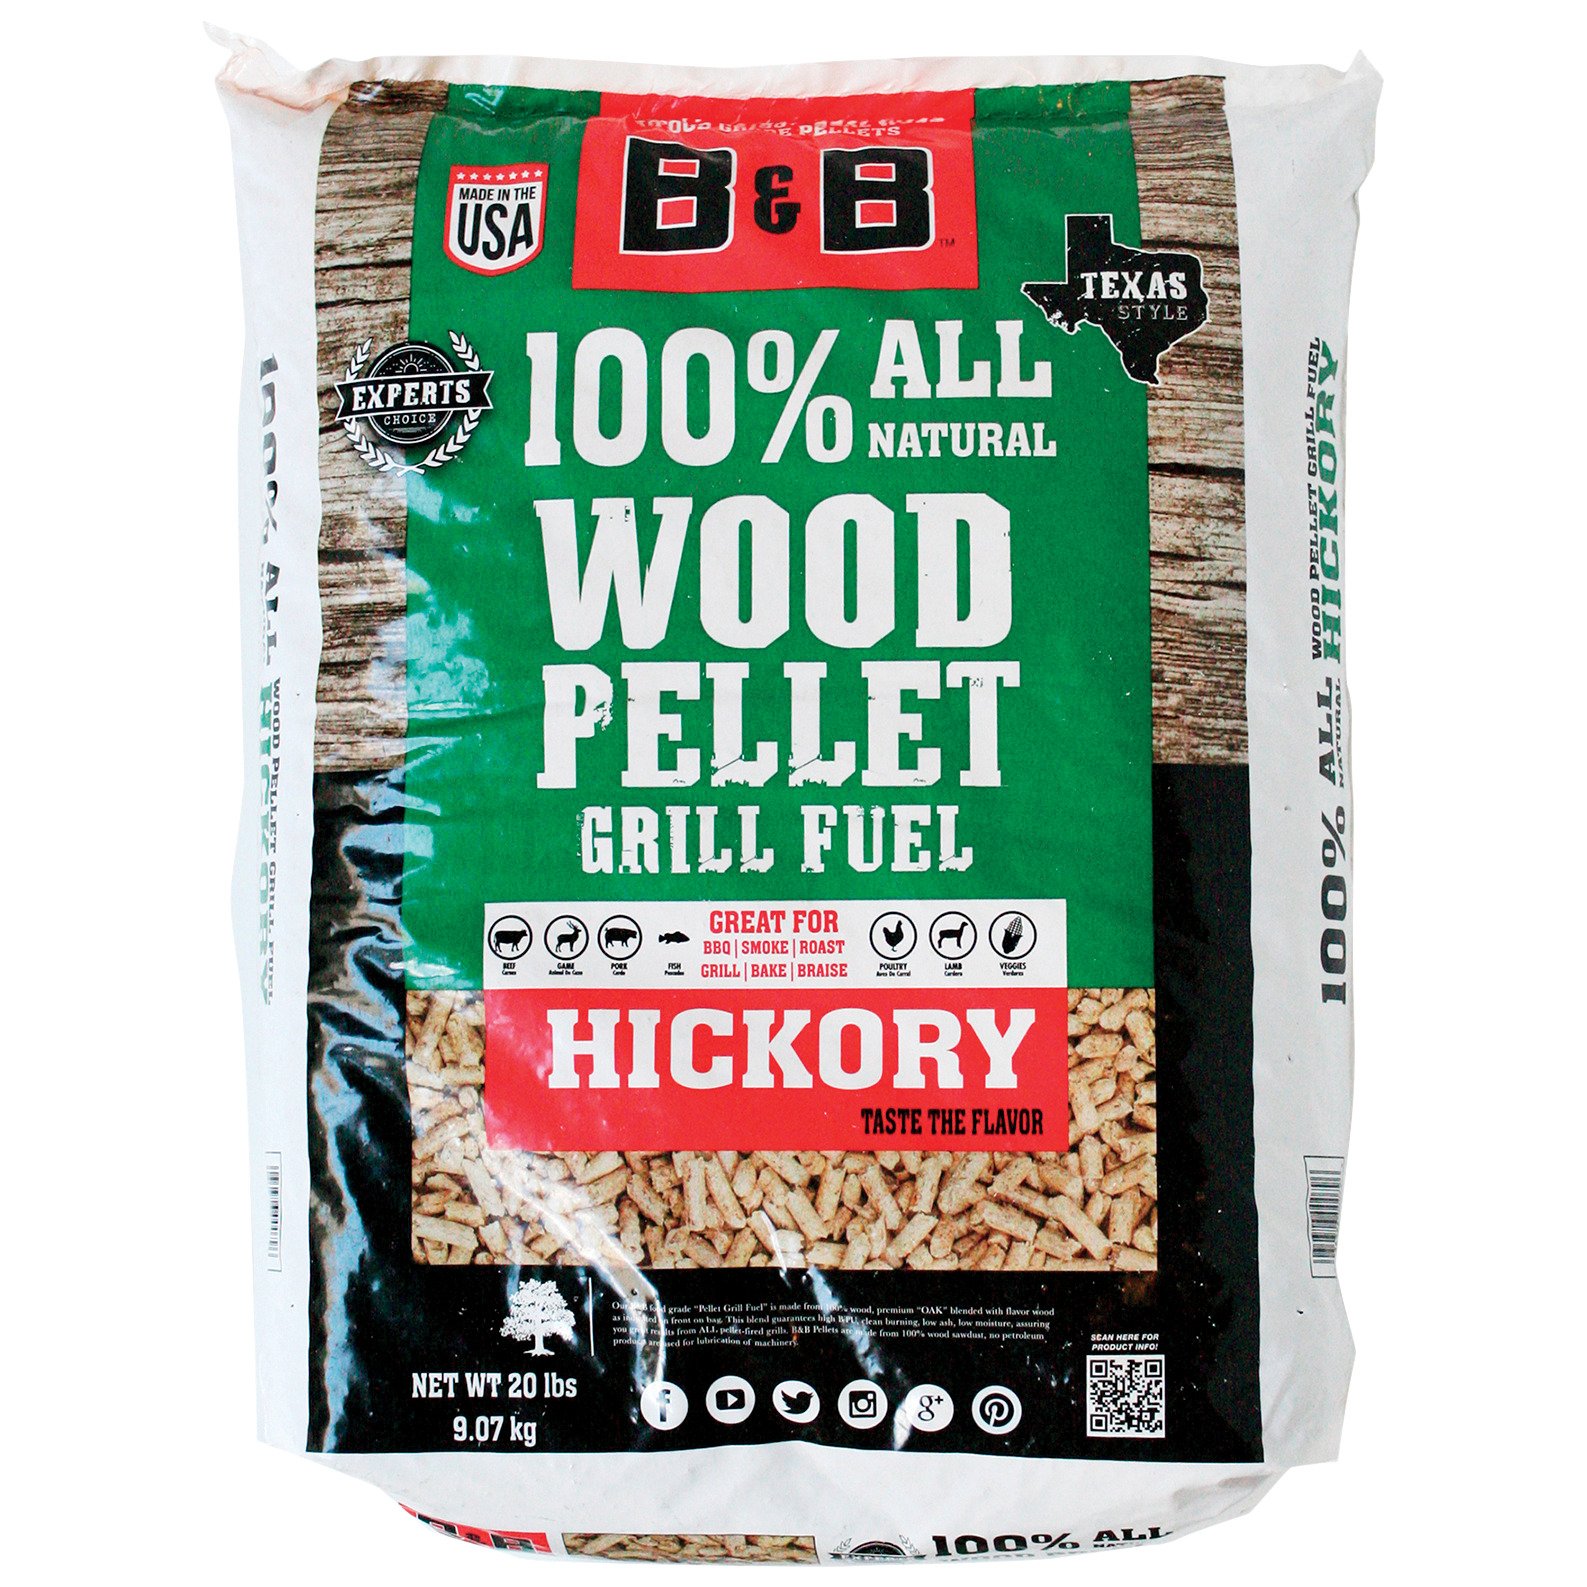 Wood Pellets Maple Hickory Cherry Blend 4 PACK 80lbs BBQ Smoker Grilling Fuel